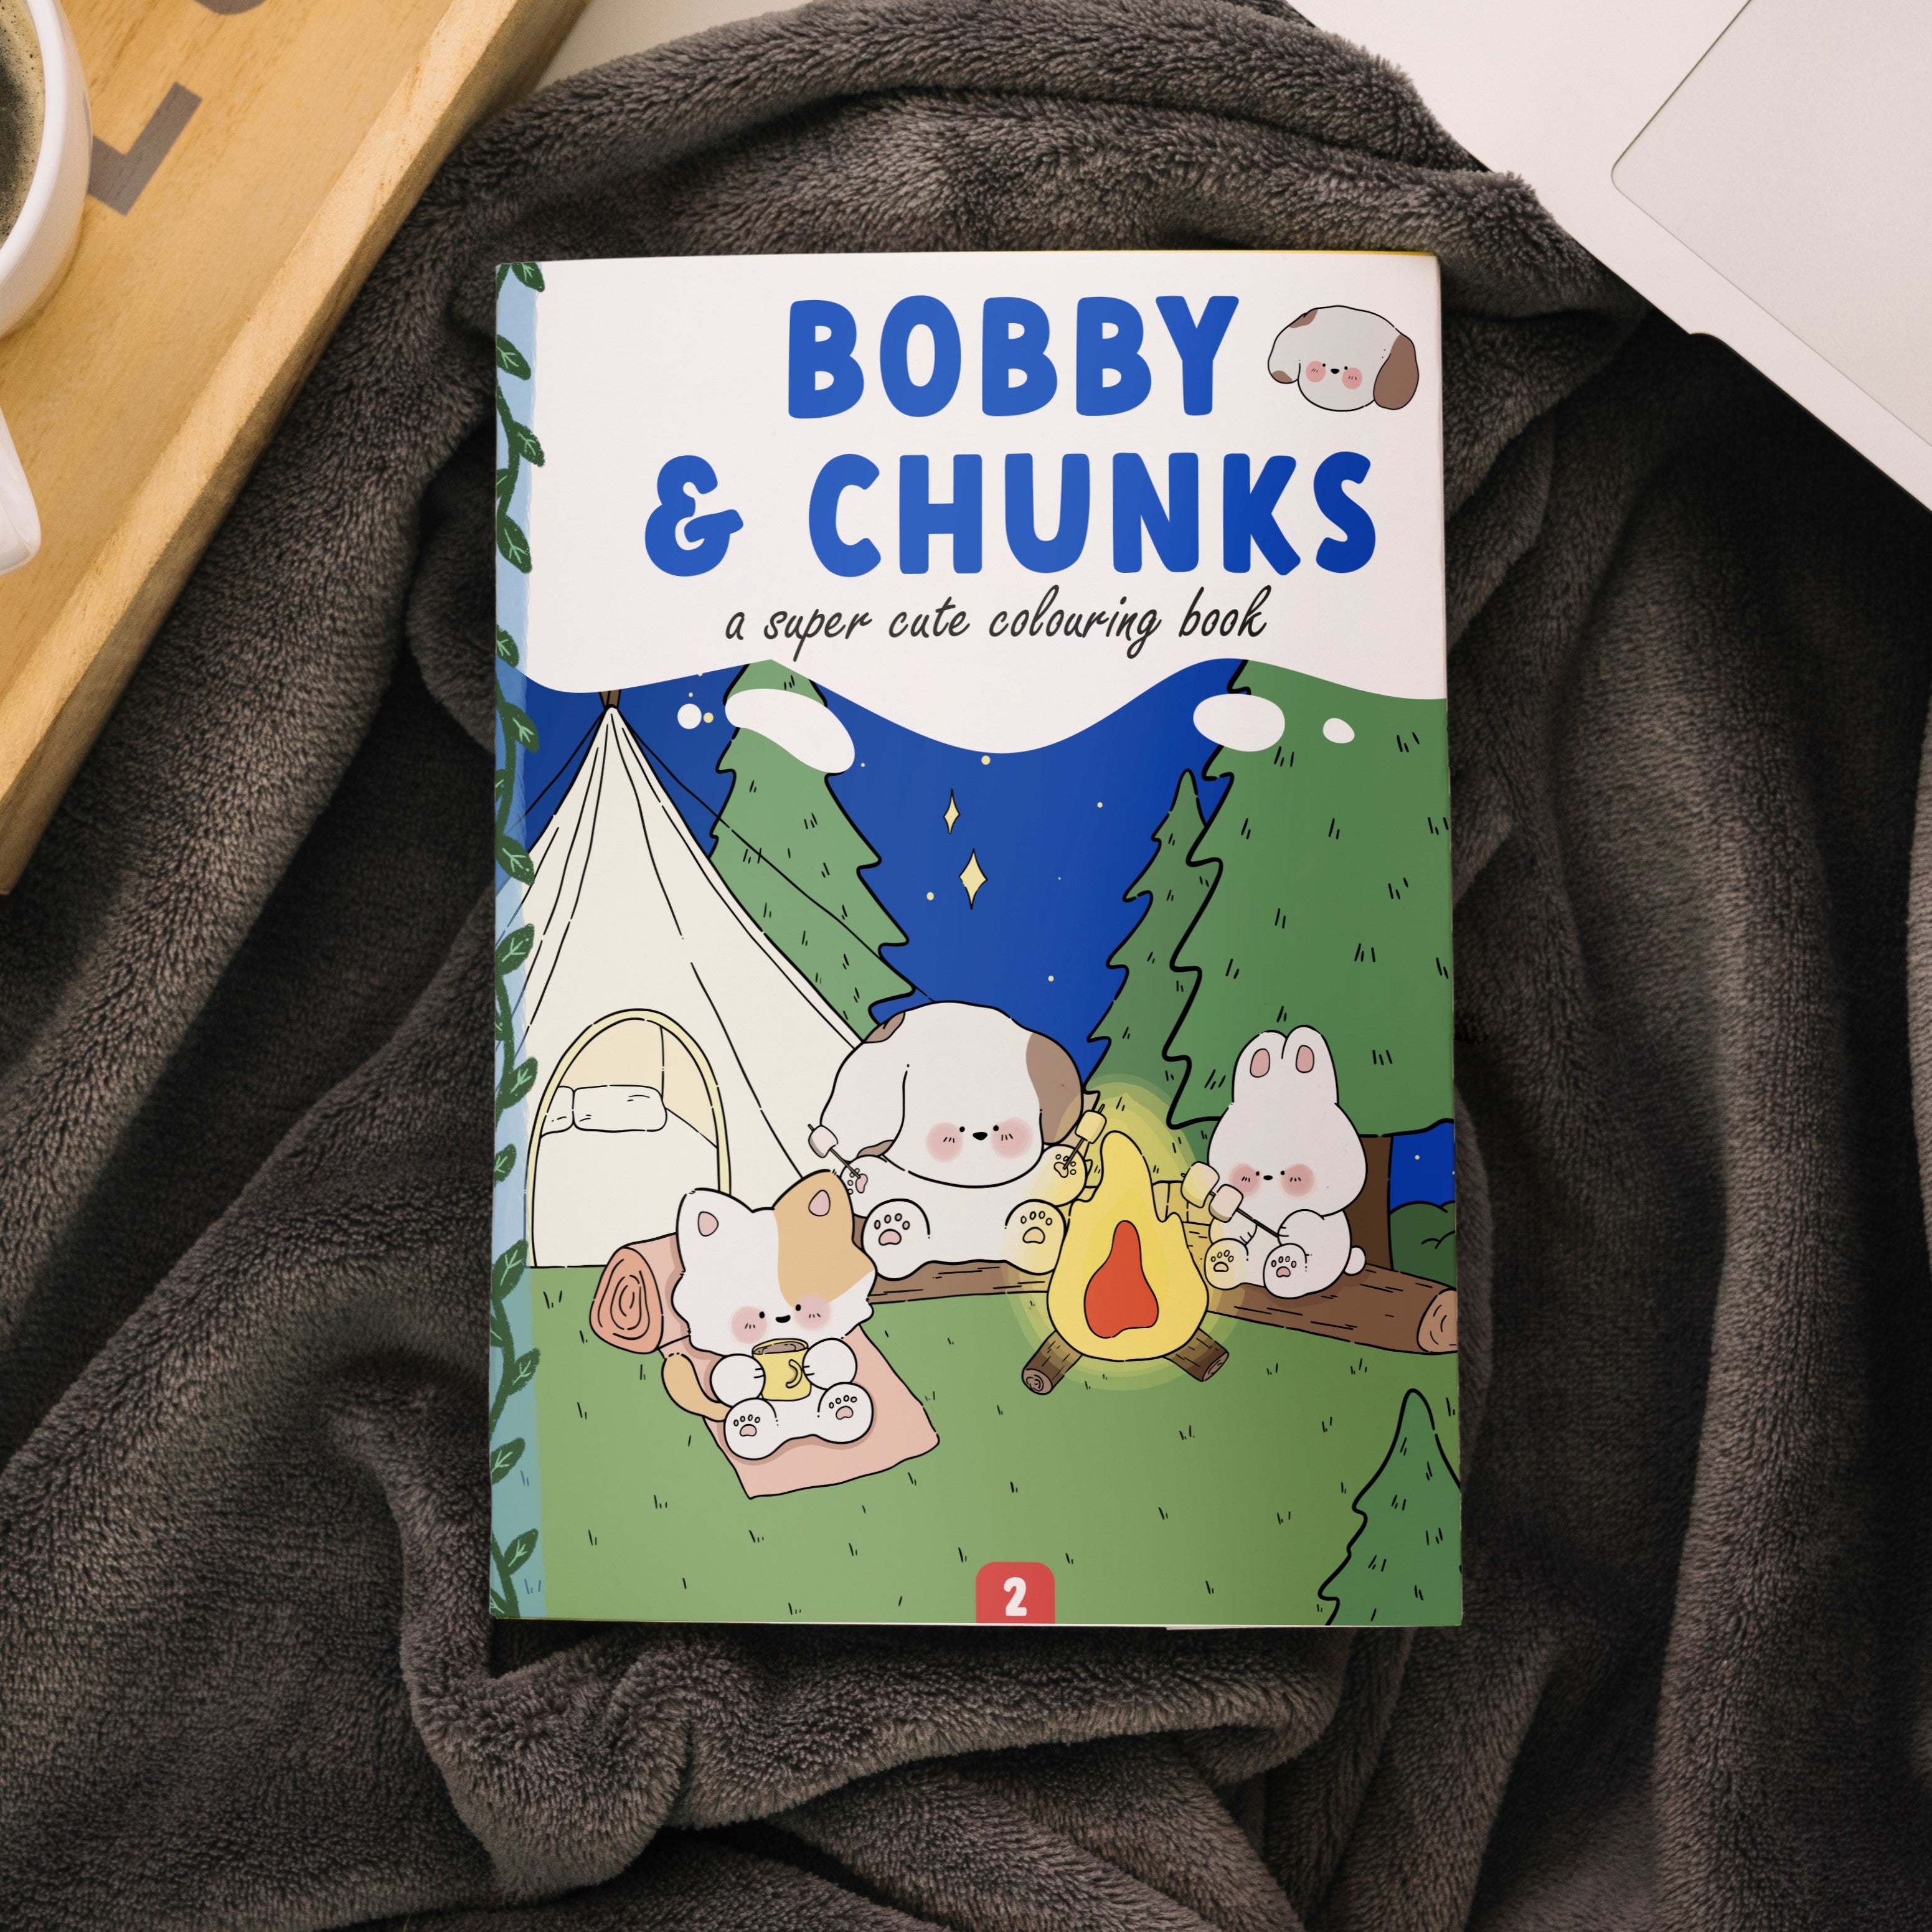 Bobby and chunks: Part 2